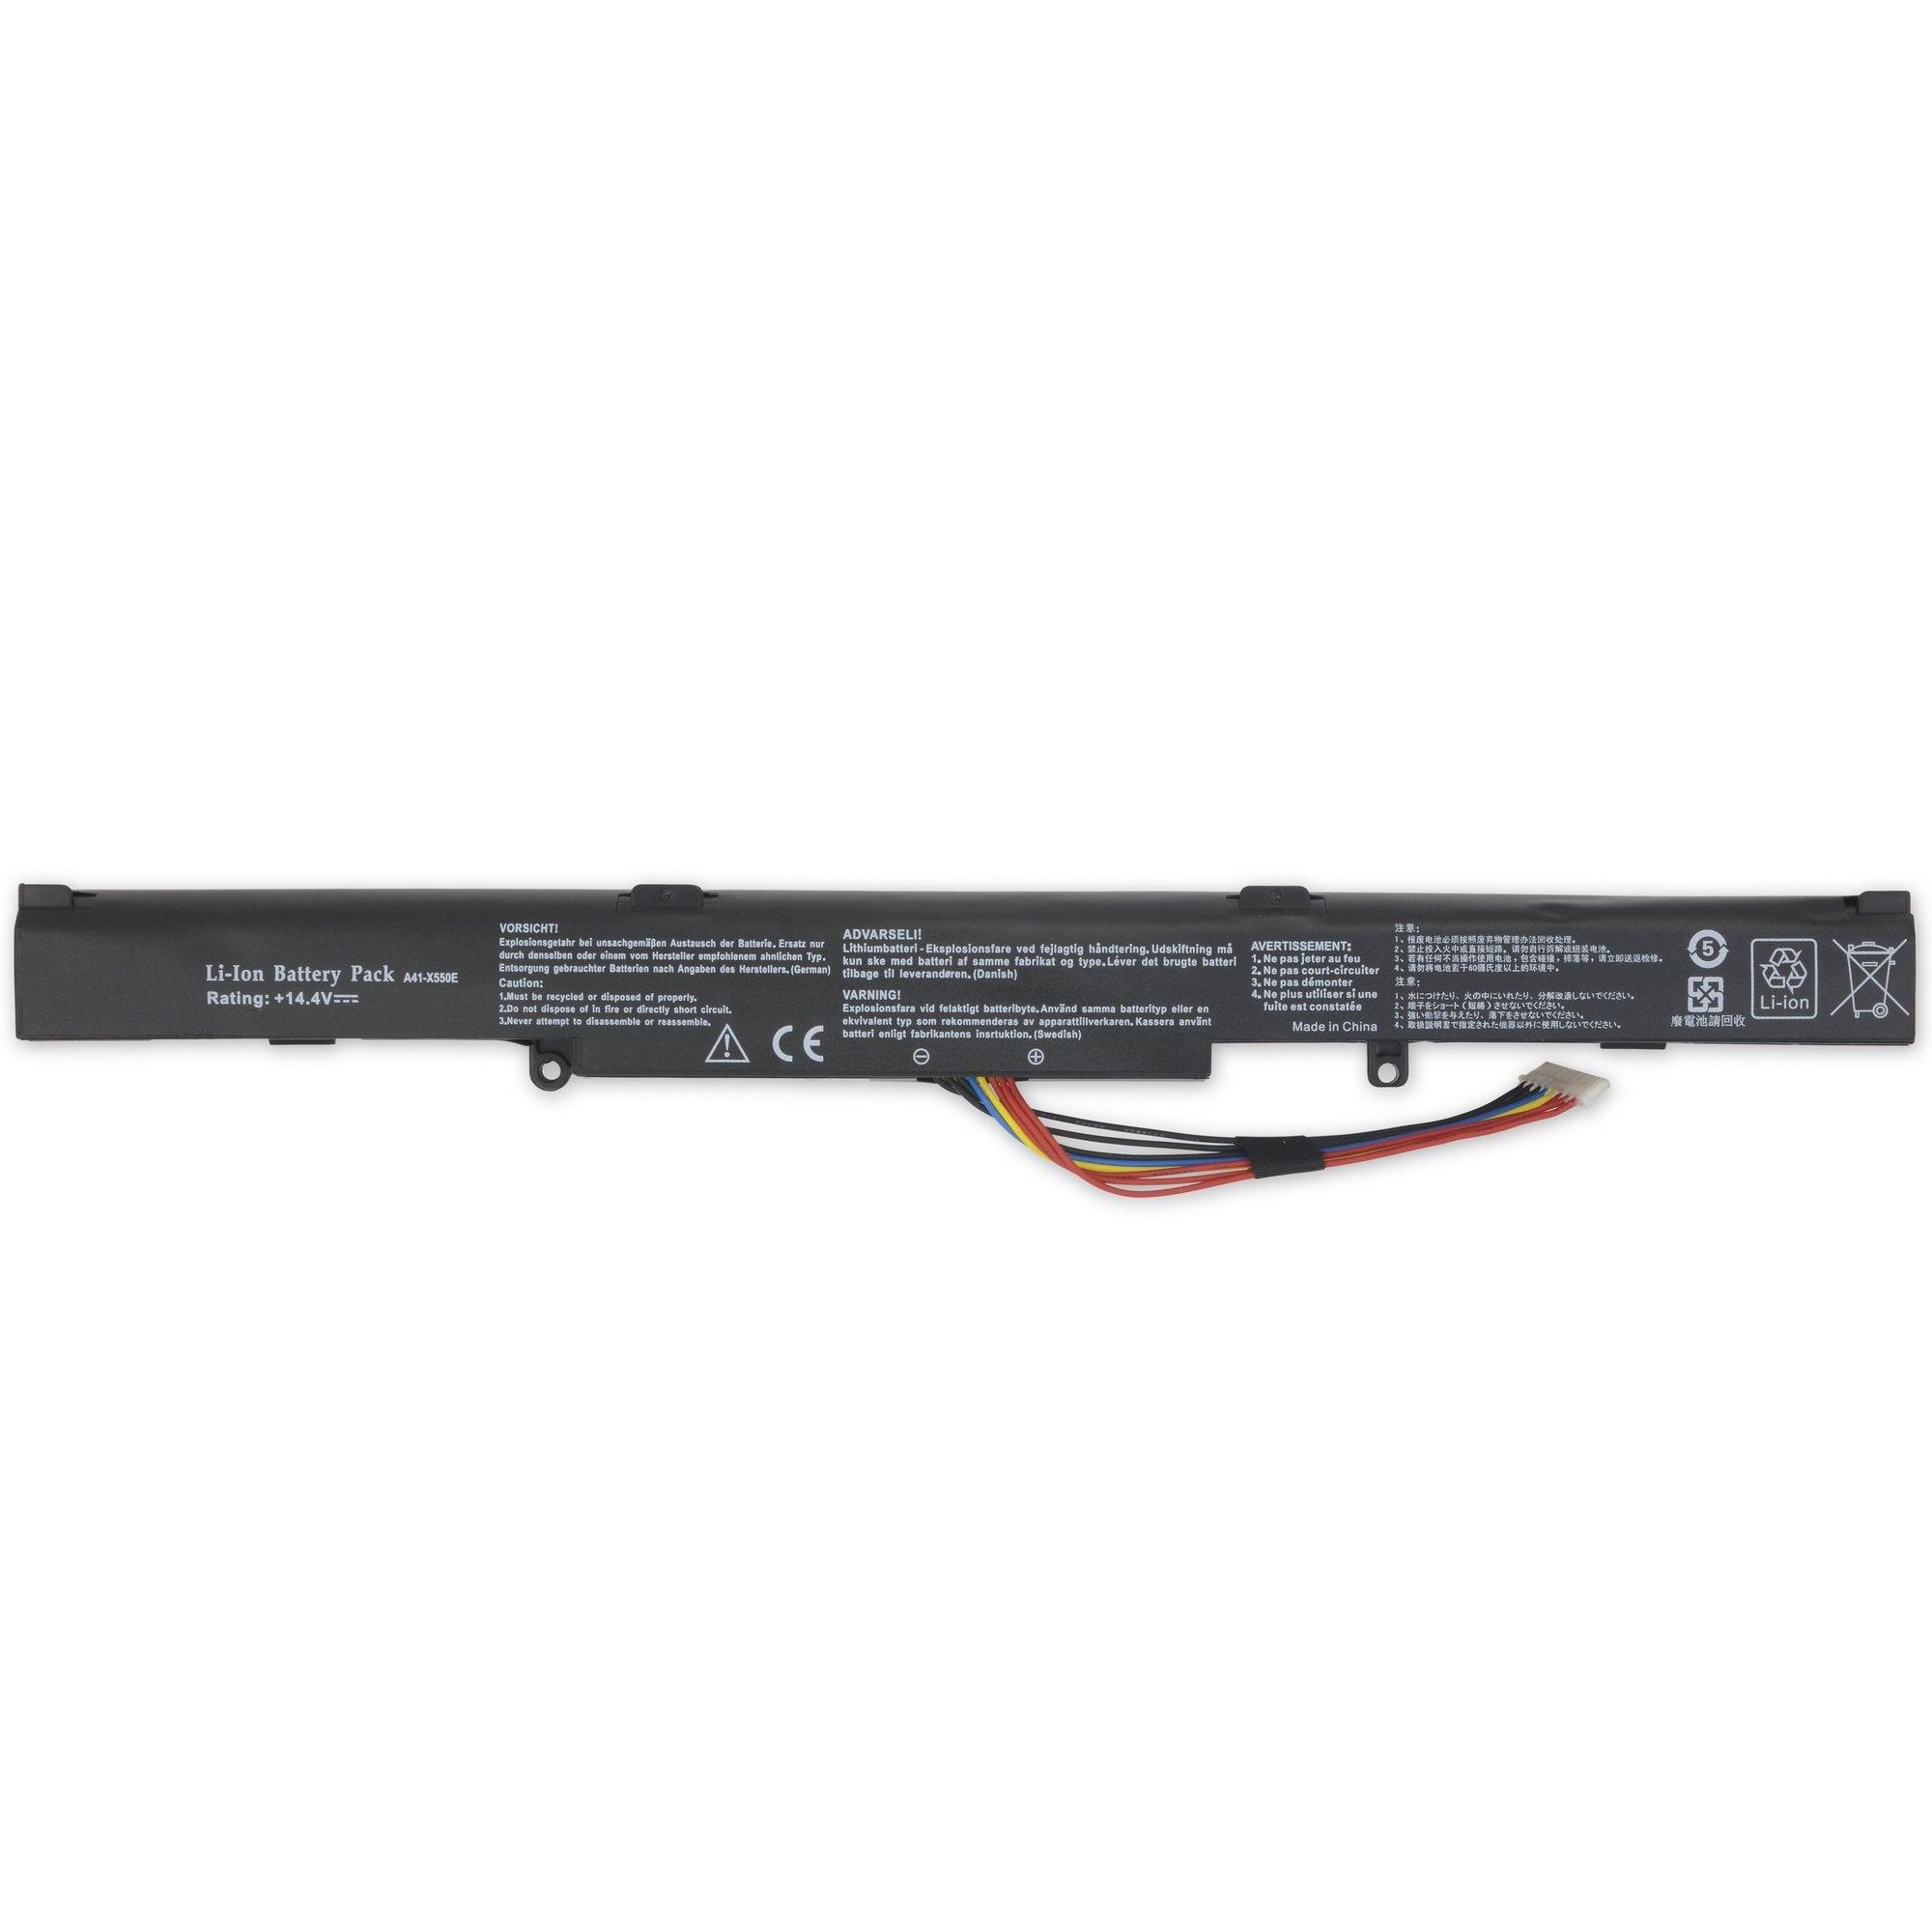 Asus A41-X550E Laptop Battery New Part Only